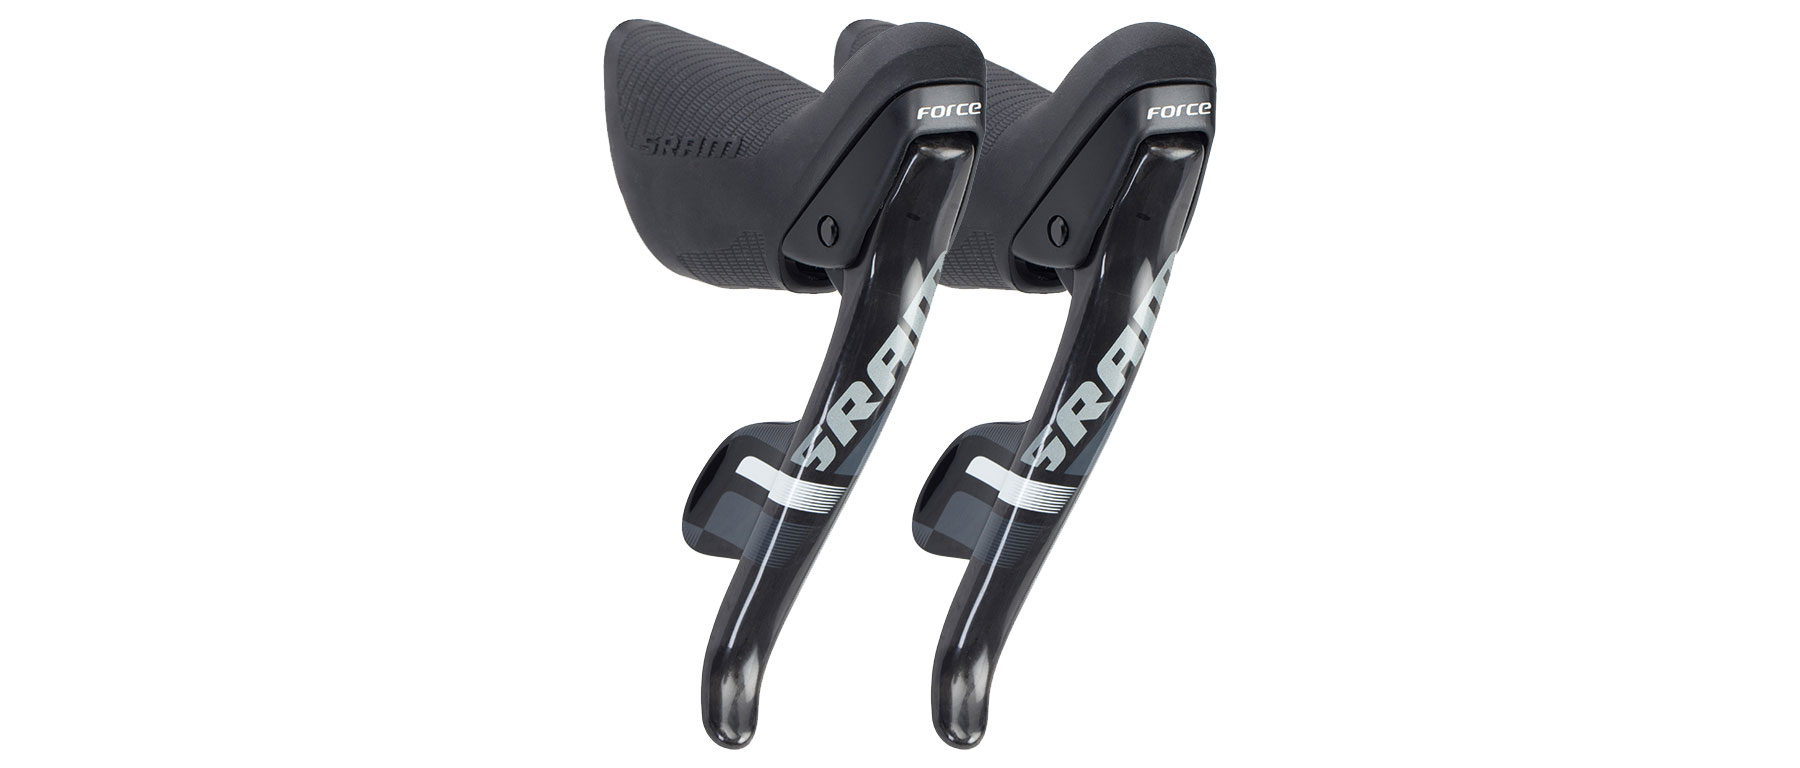 SRAM Force 22 11-Speed Shifters